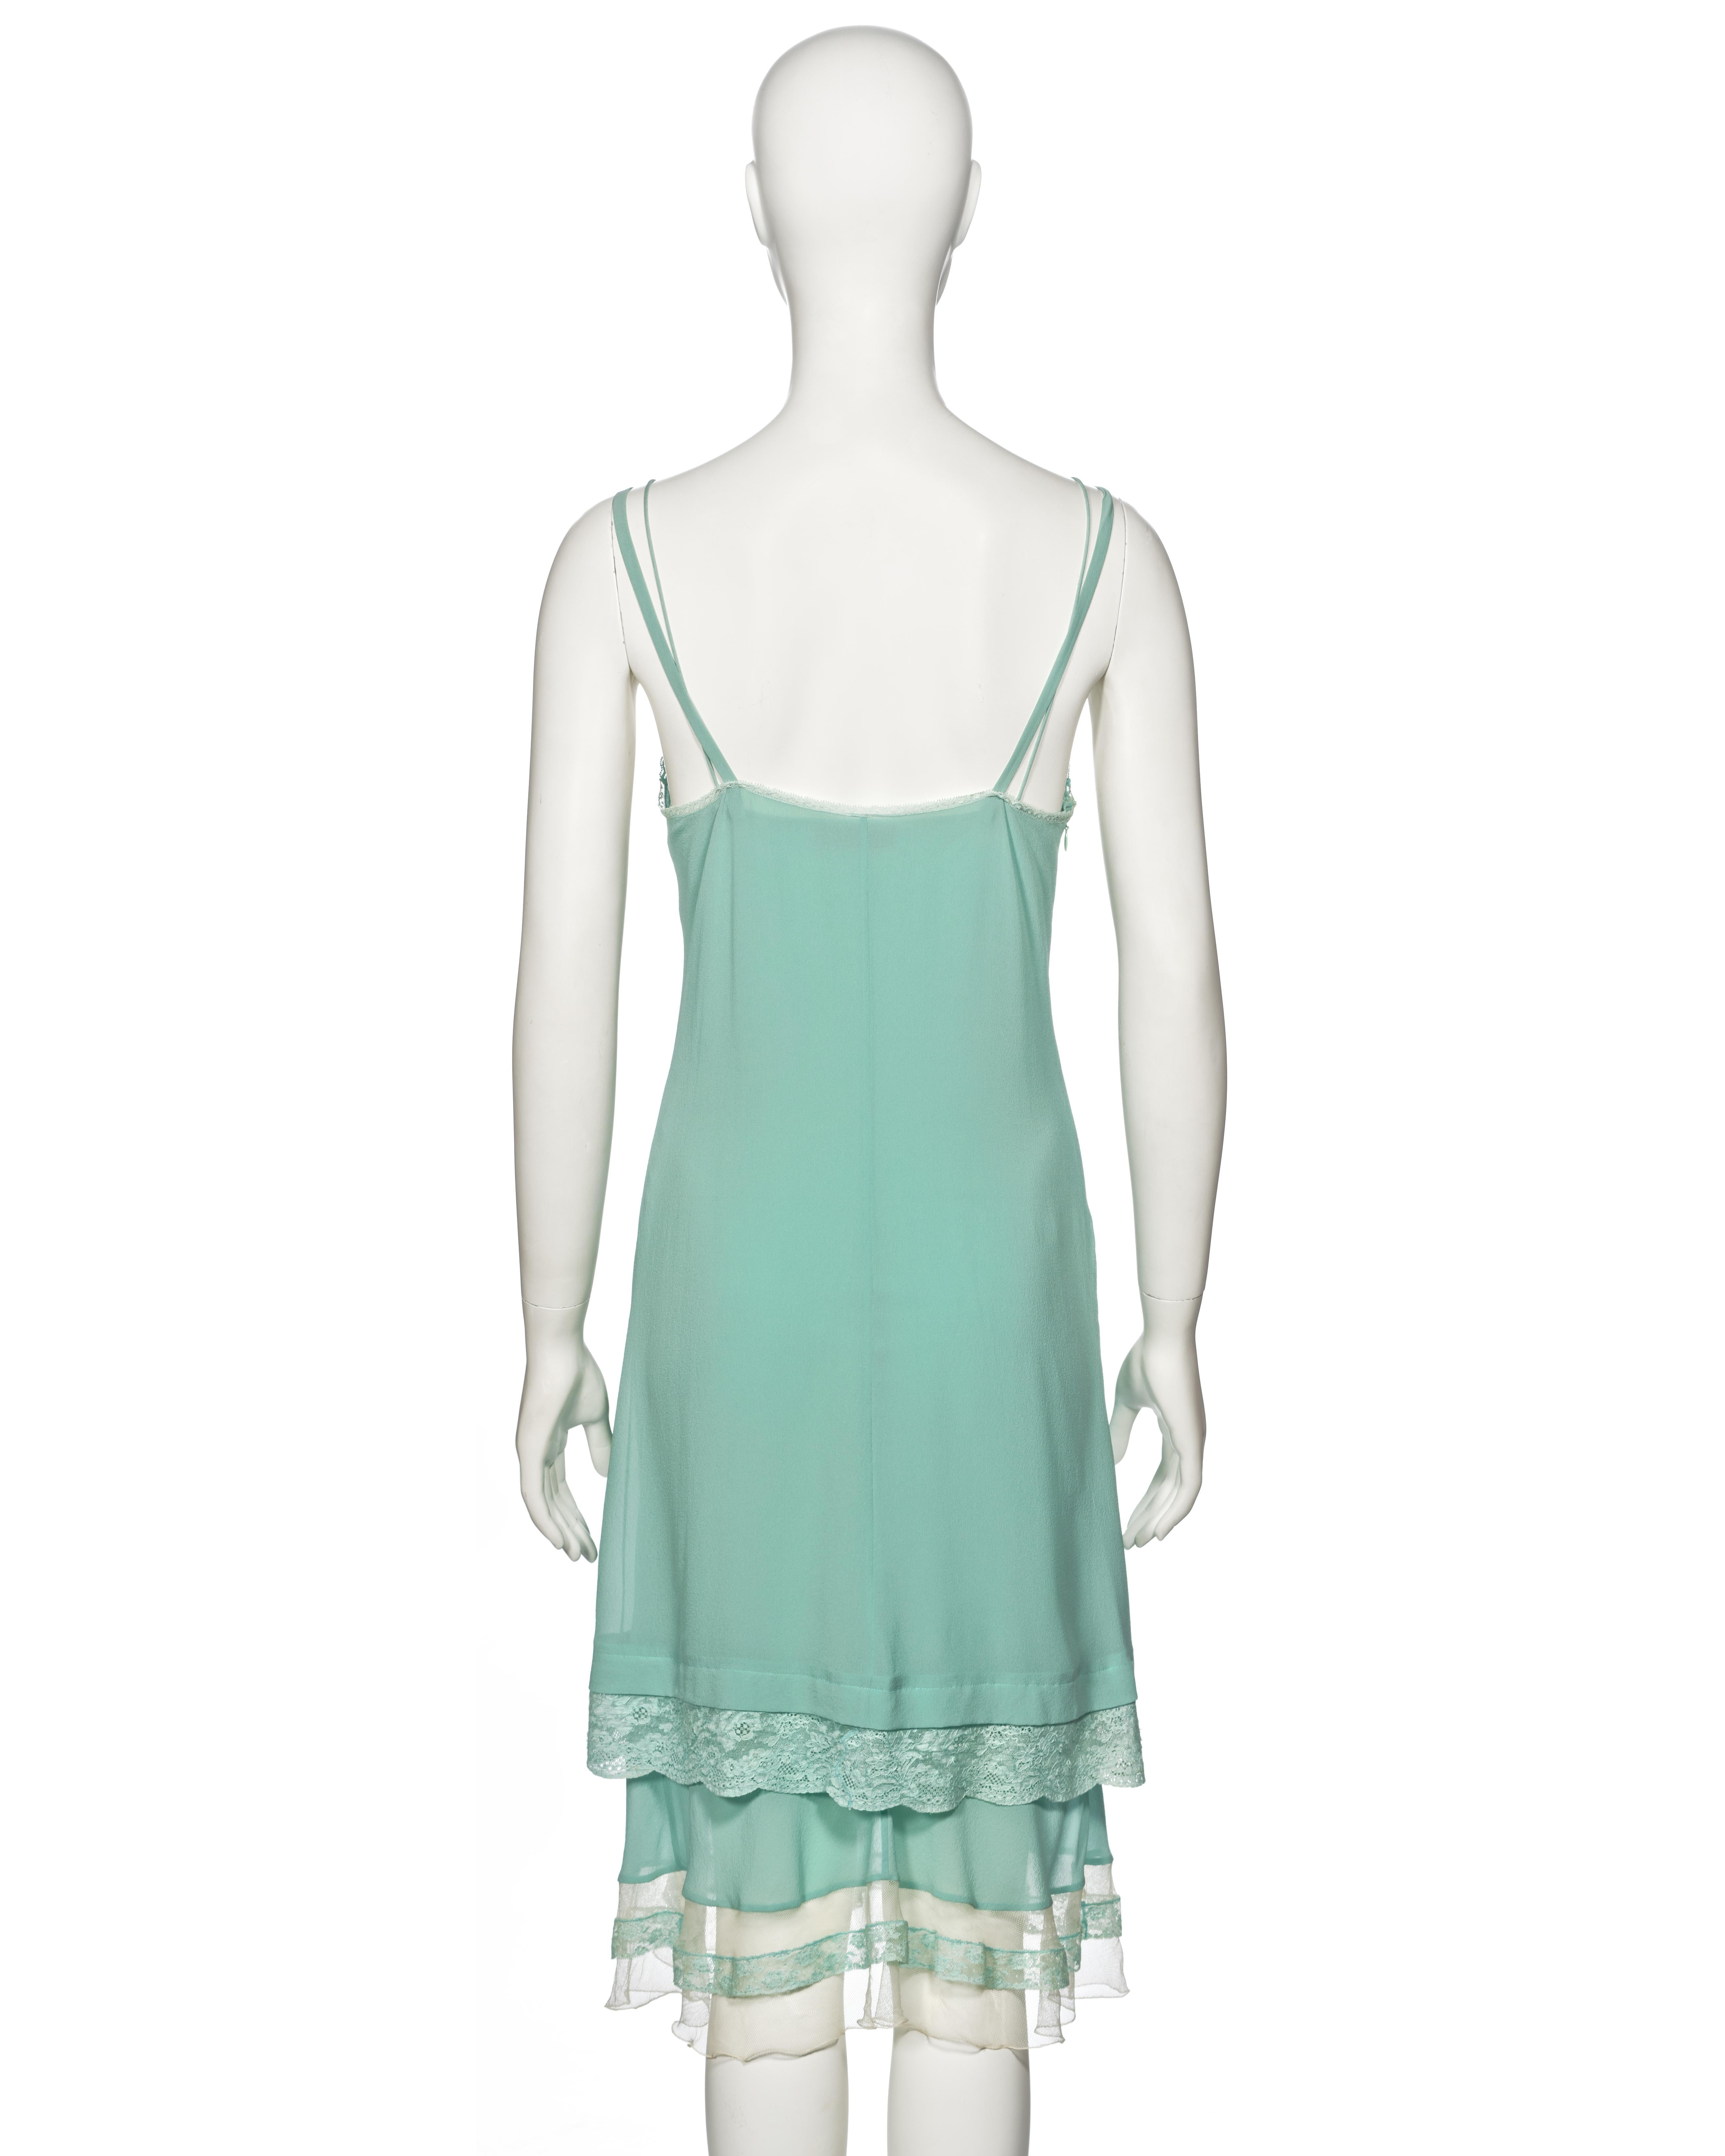 Christian Dior by John Galliano Turquoise Silk Double Layered Dress, ss 2005 4